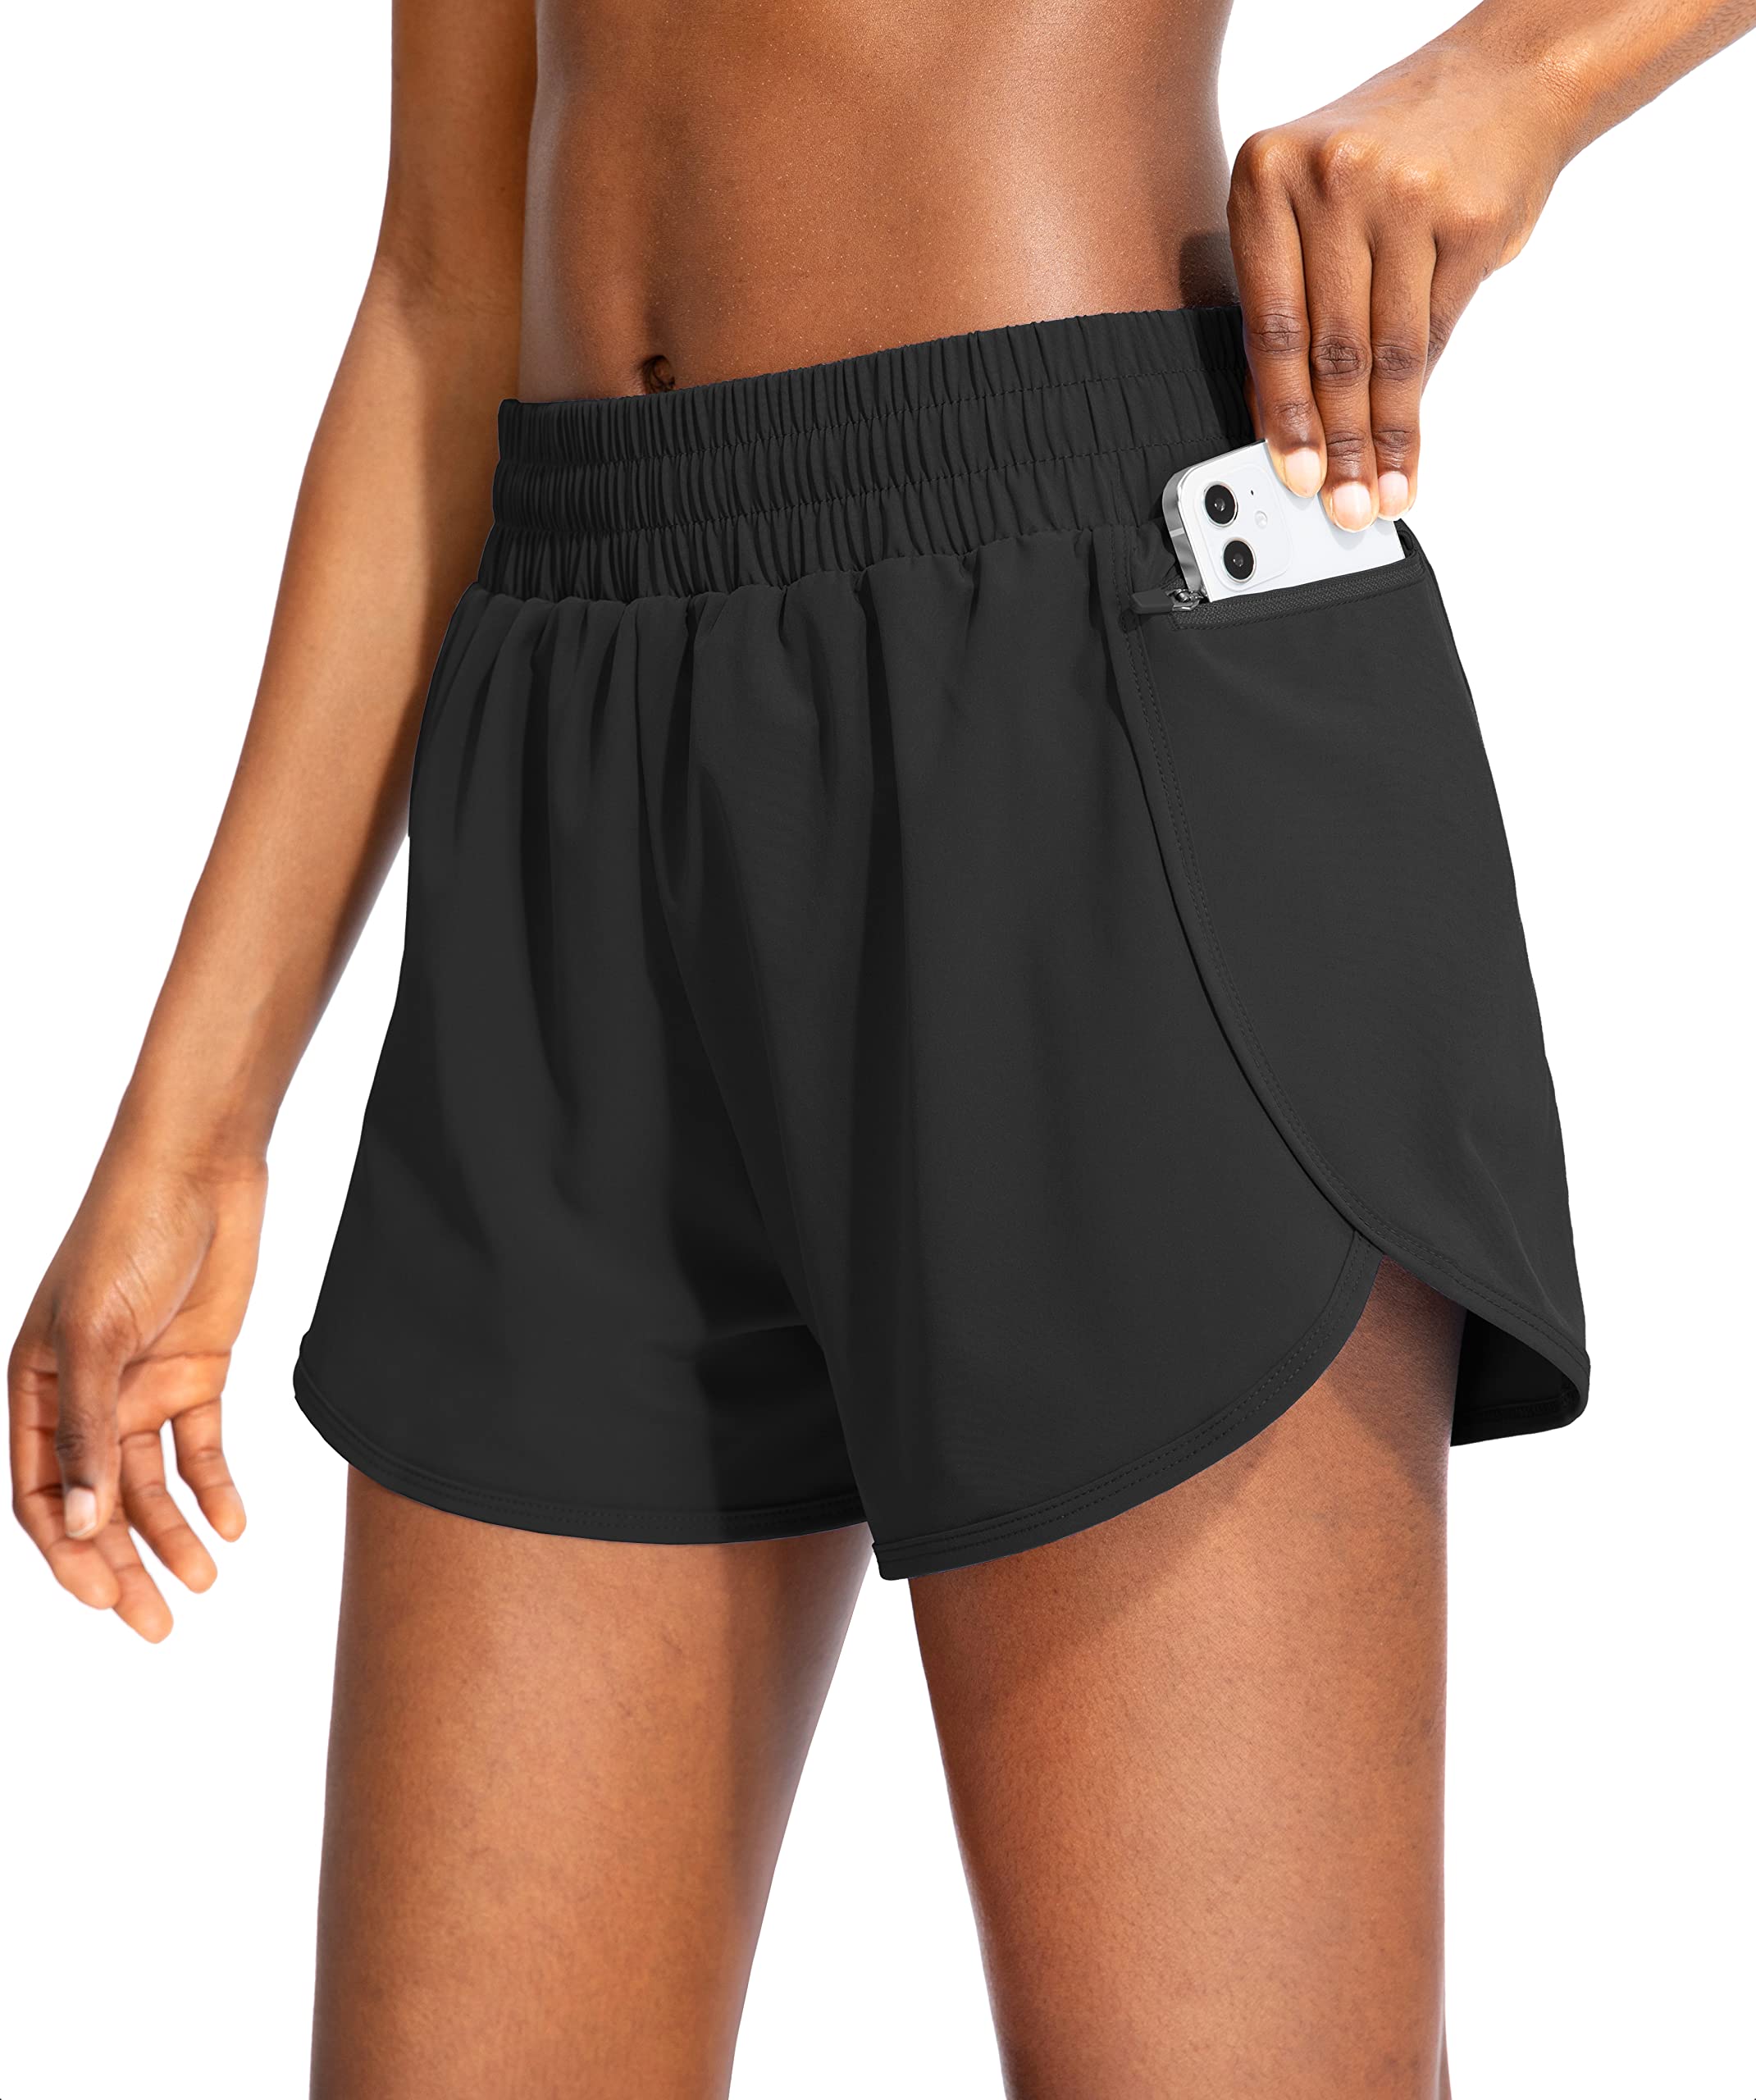 THE GYM PEOPLE Womens High Waisted Running Shorts Quick Dry Athletic  Workout Shorts with Mesh Liner Zipper Pockets(Black Grey Camo) - The Gym  People